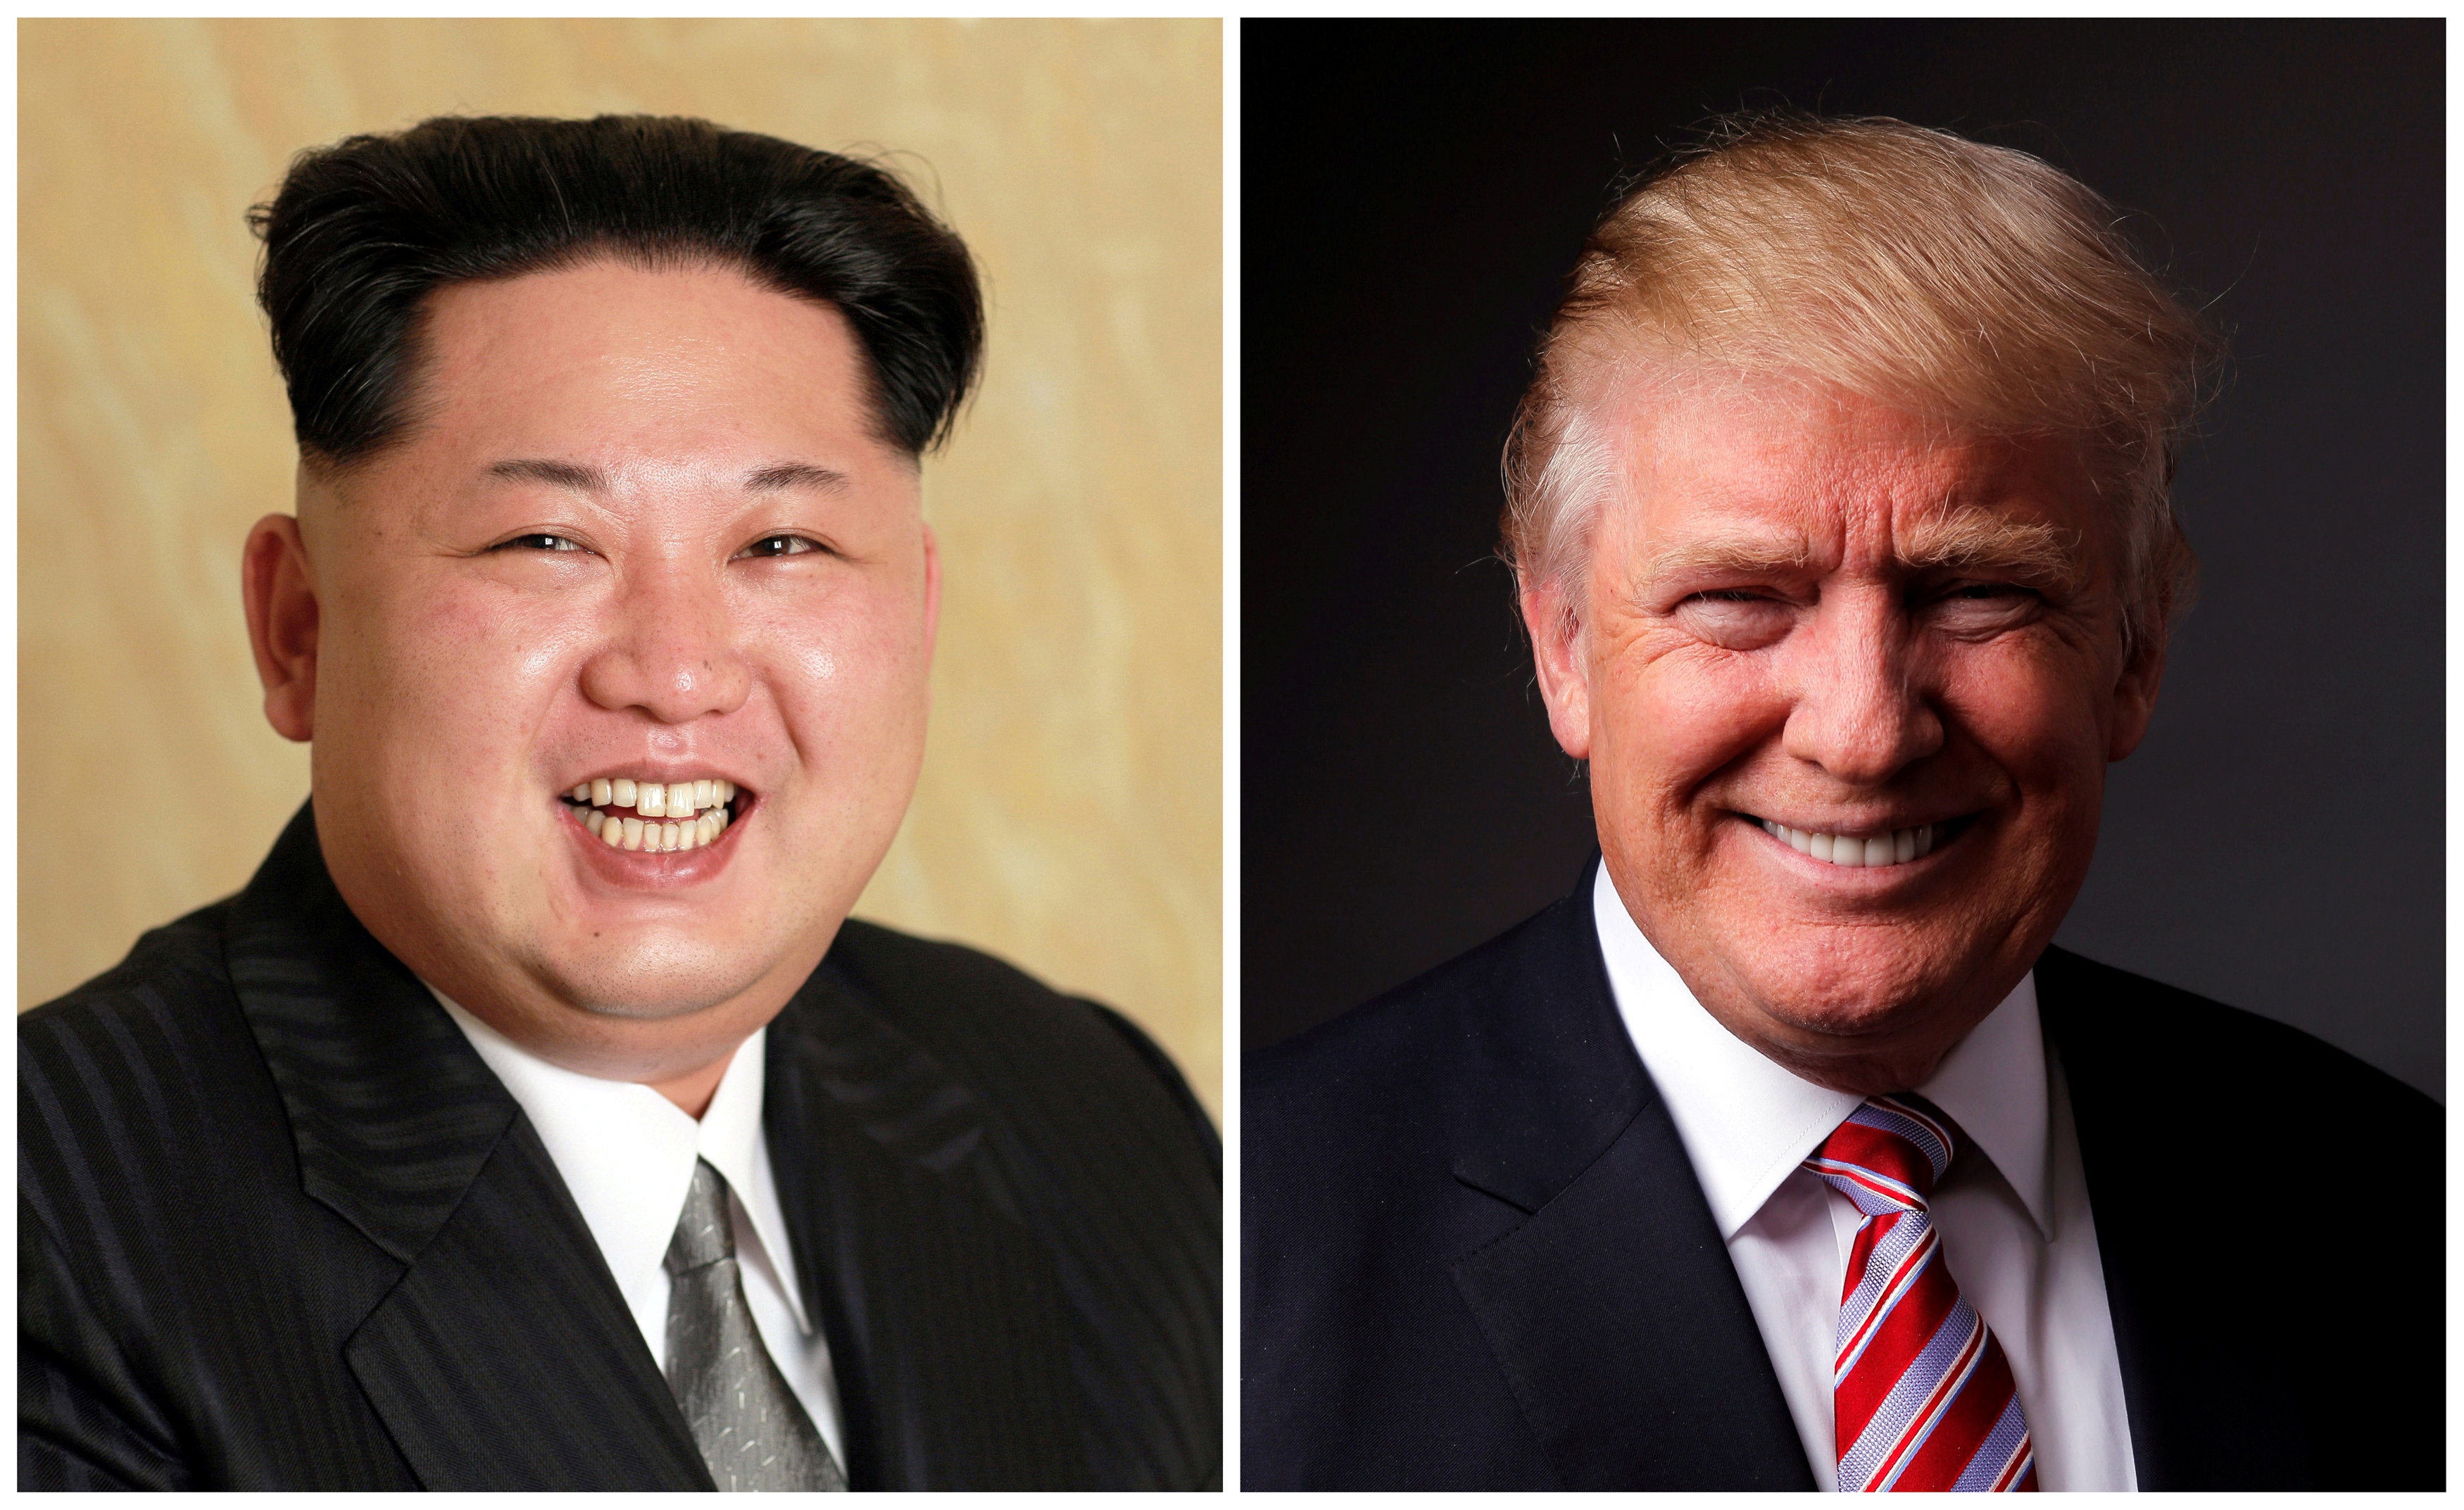 Trump would talk to North Korea's Kim, wants to renegotiate climate accord